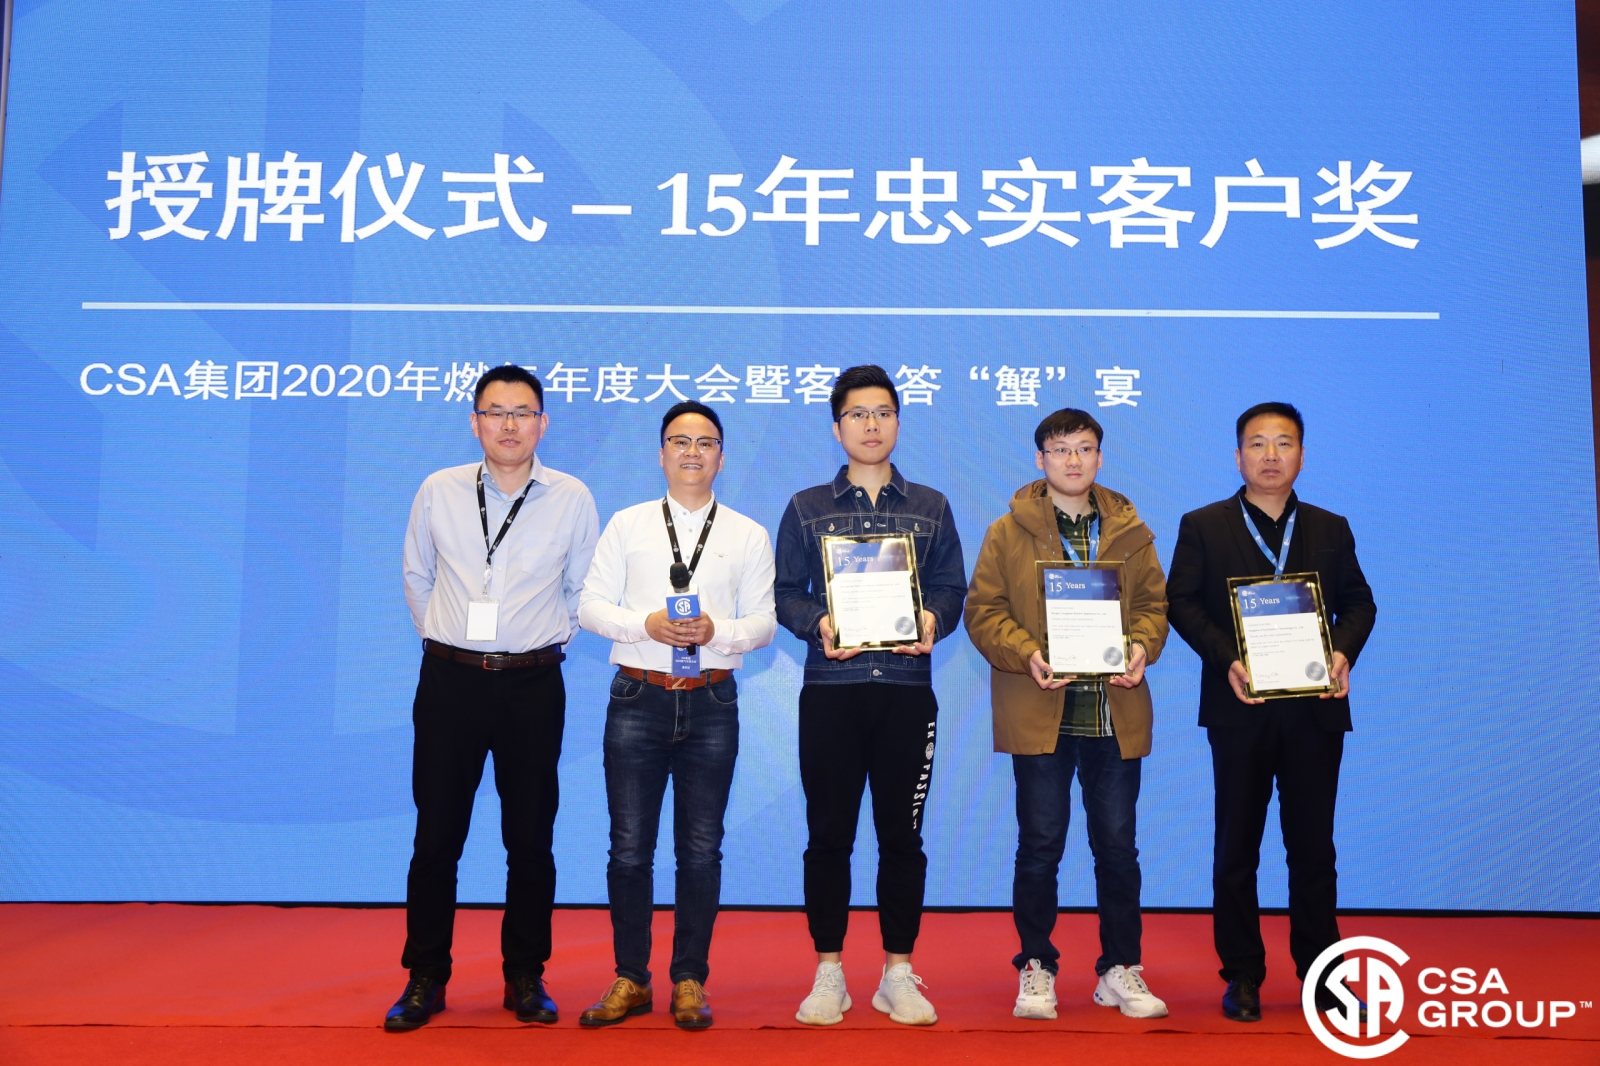 The annual conference of CSA Gas Customers was held in Kunshan